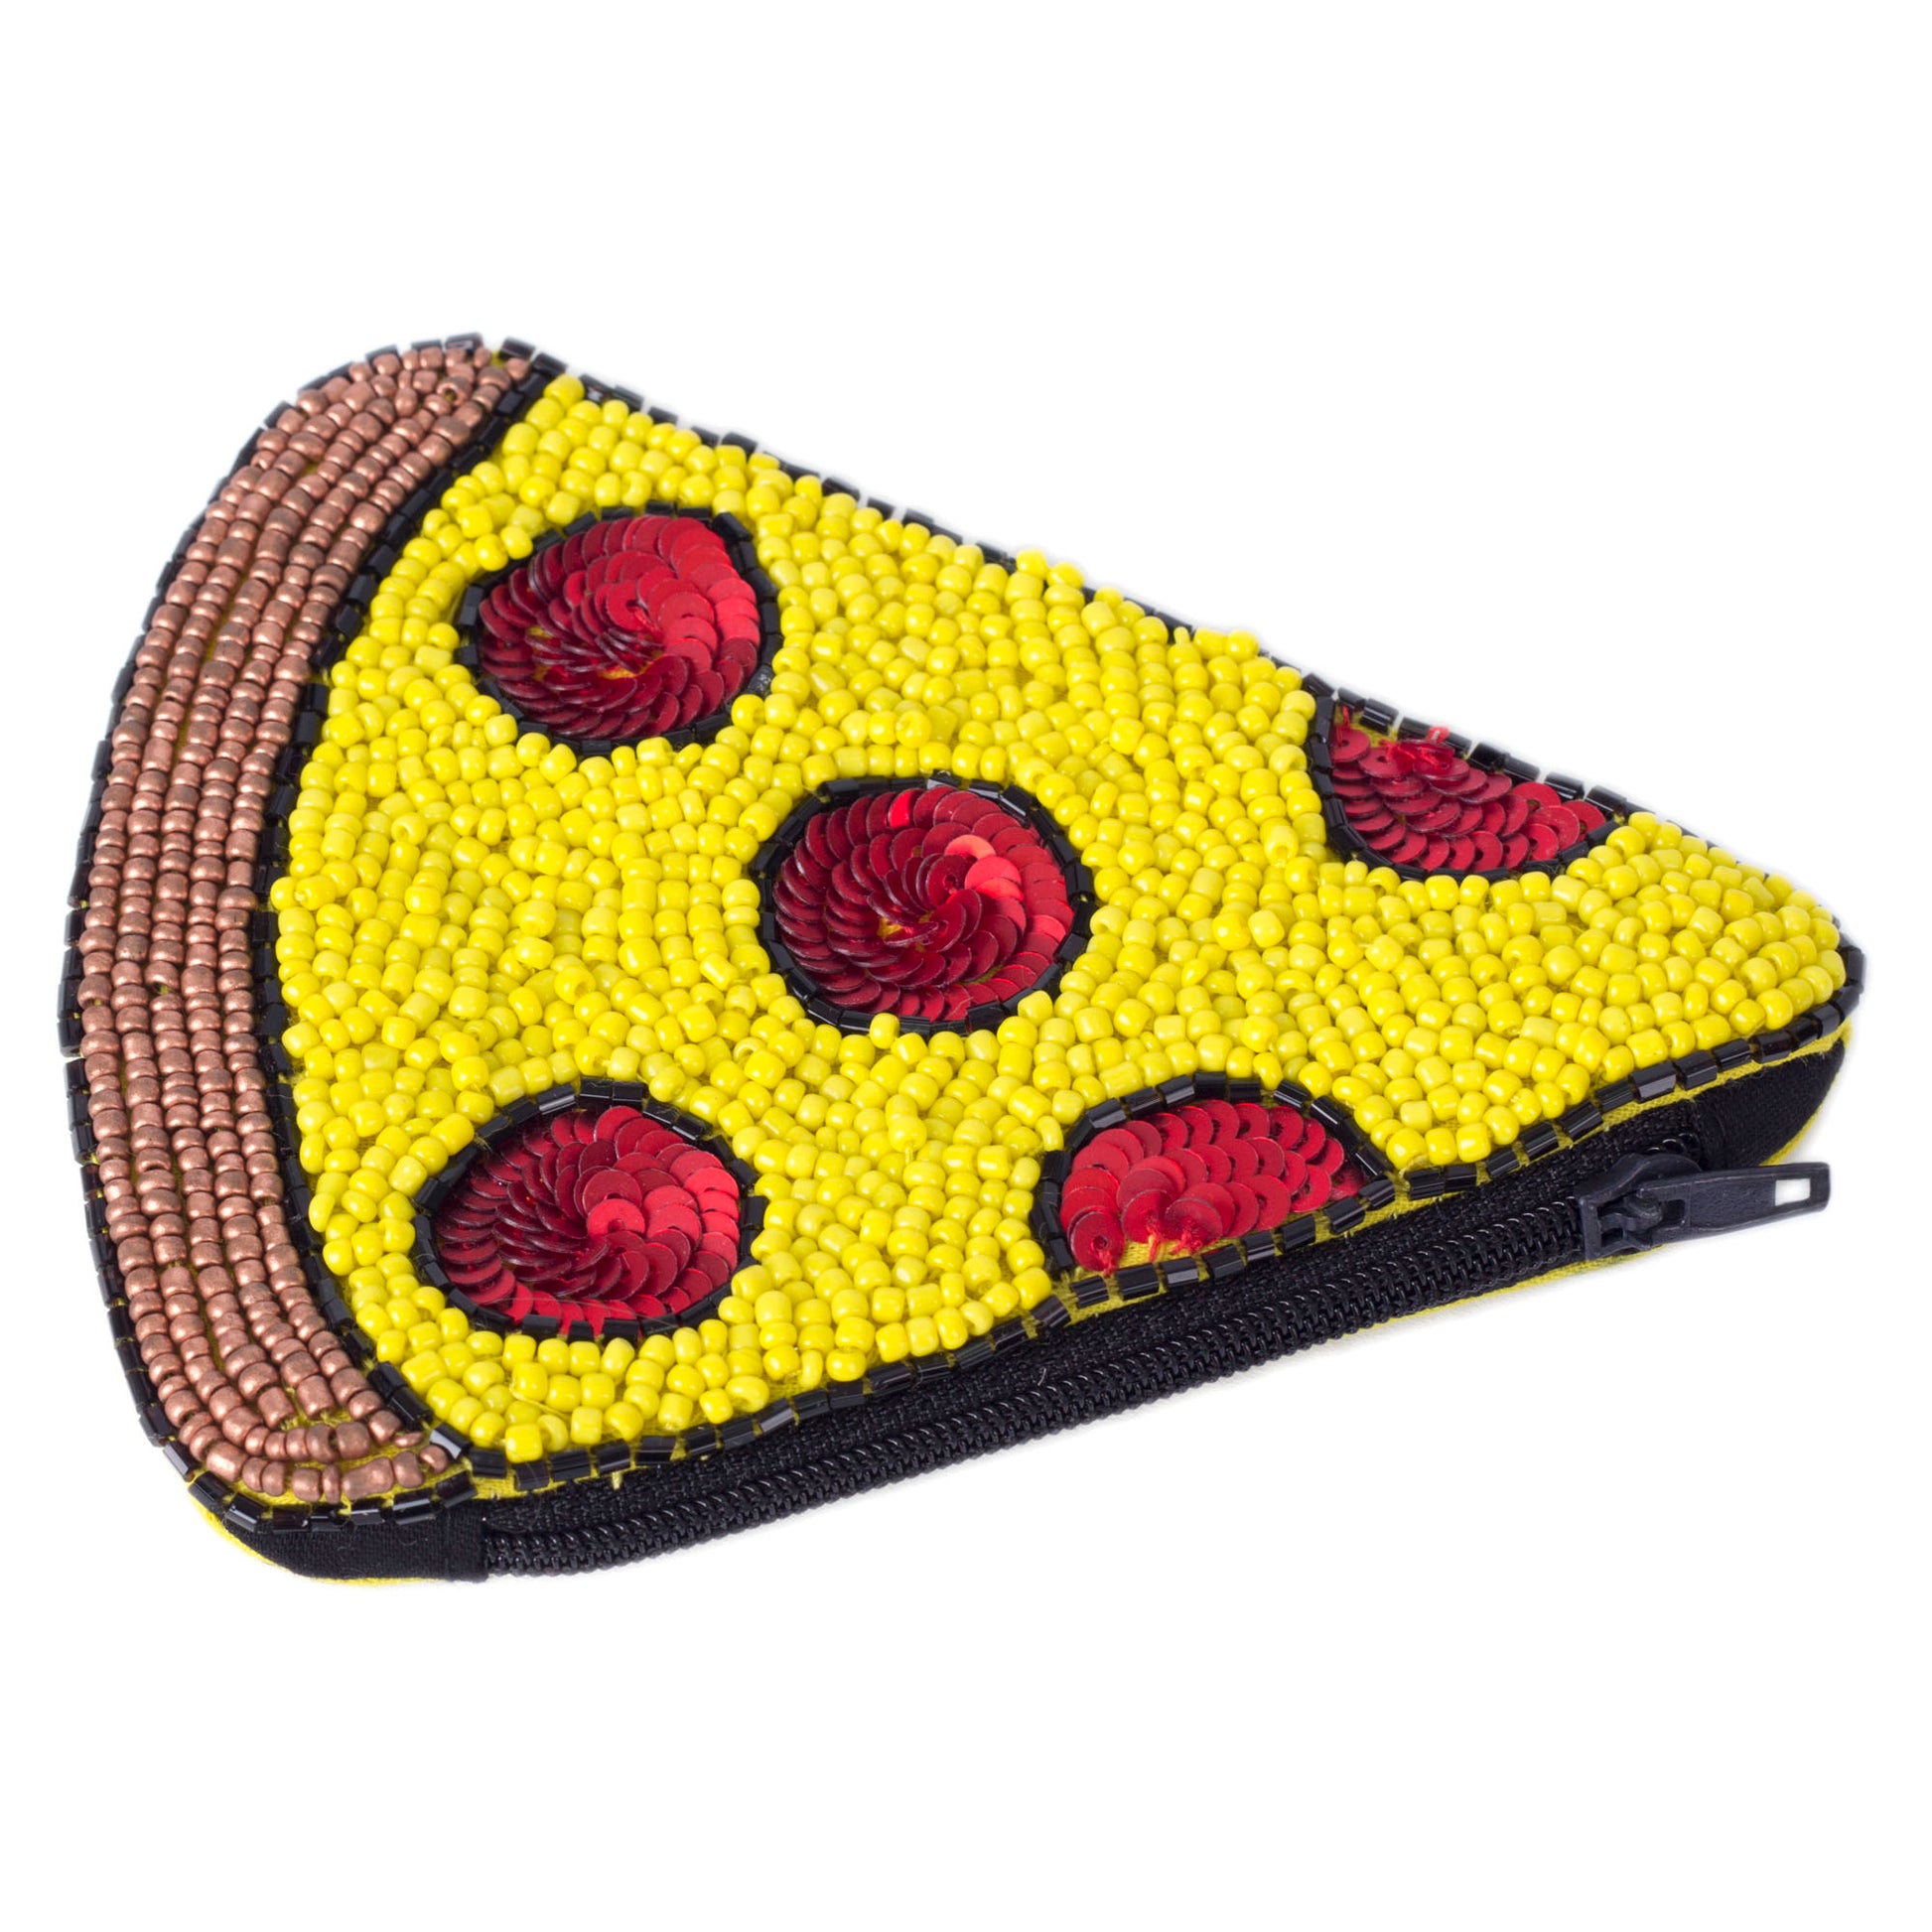 Beaded and Sequin Pizza Coin Purse